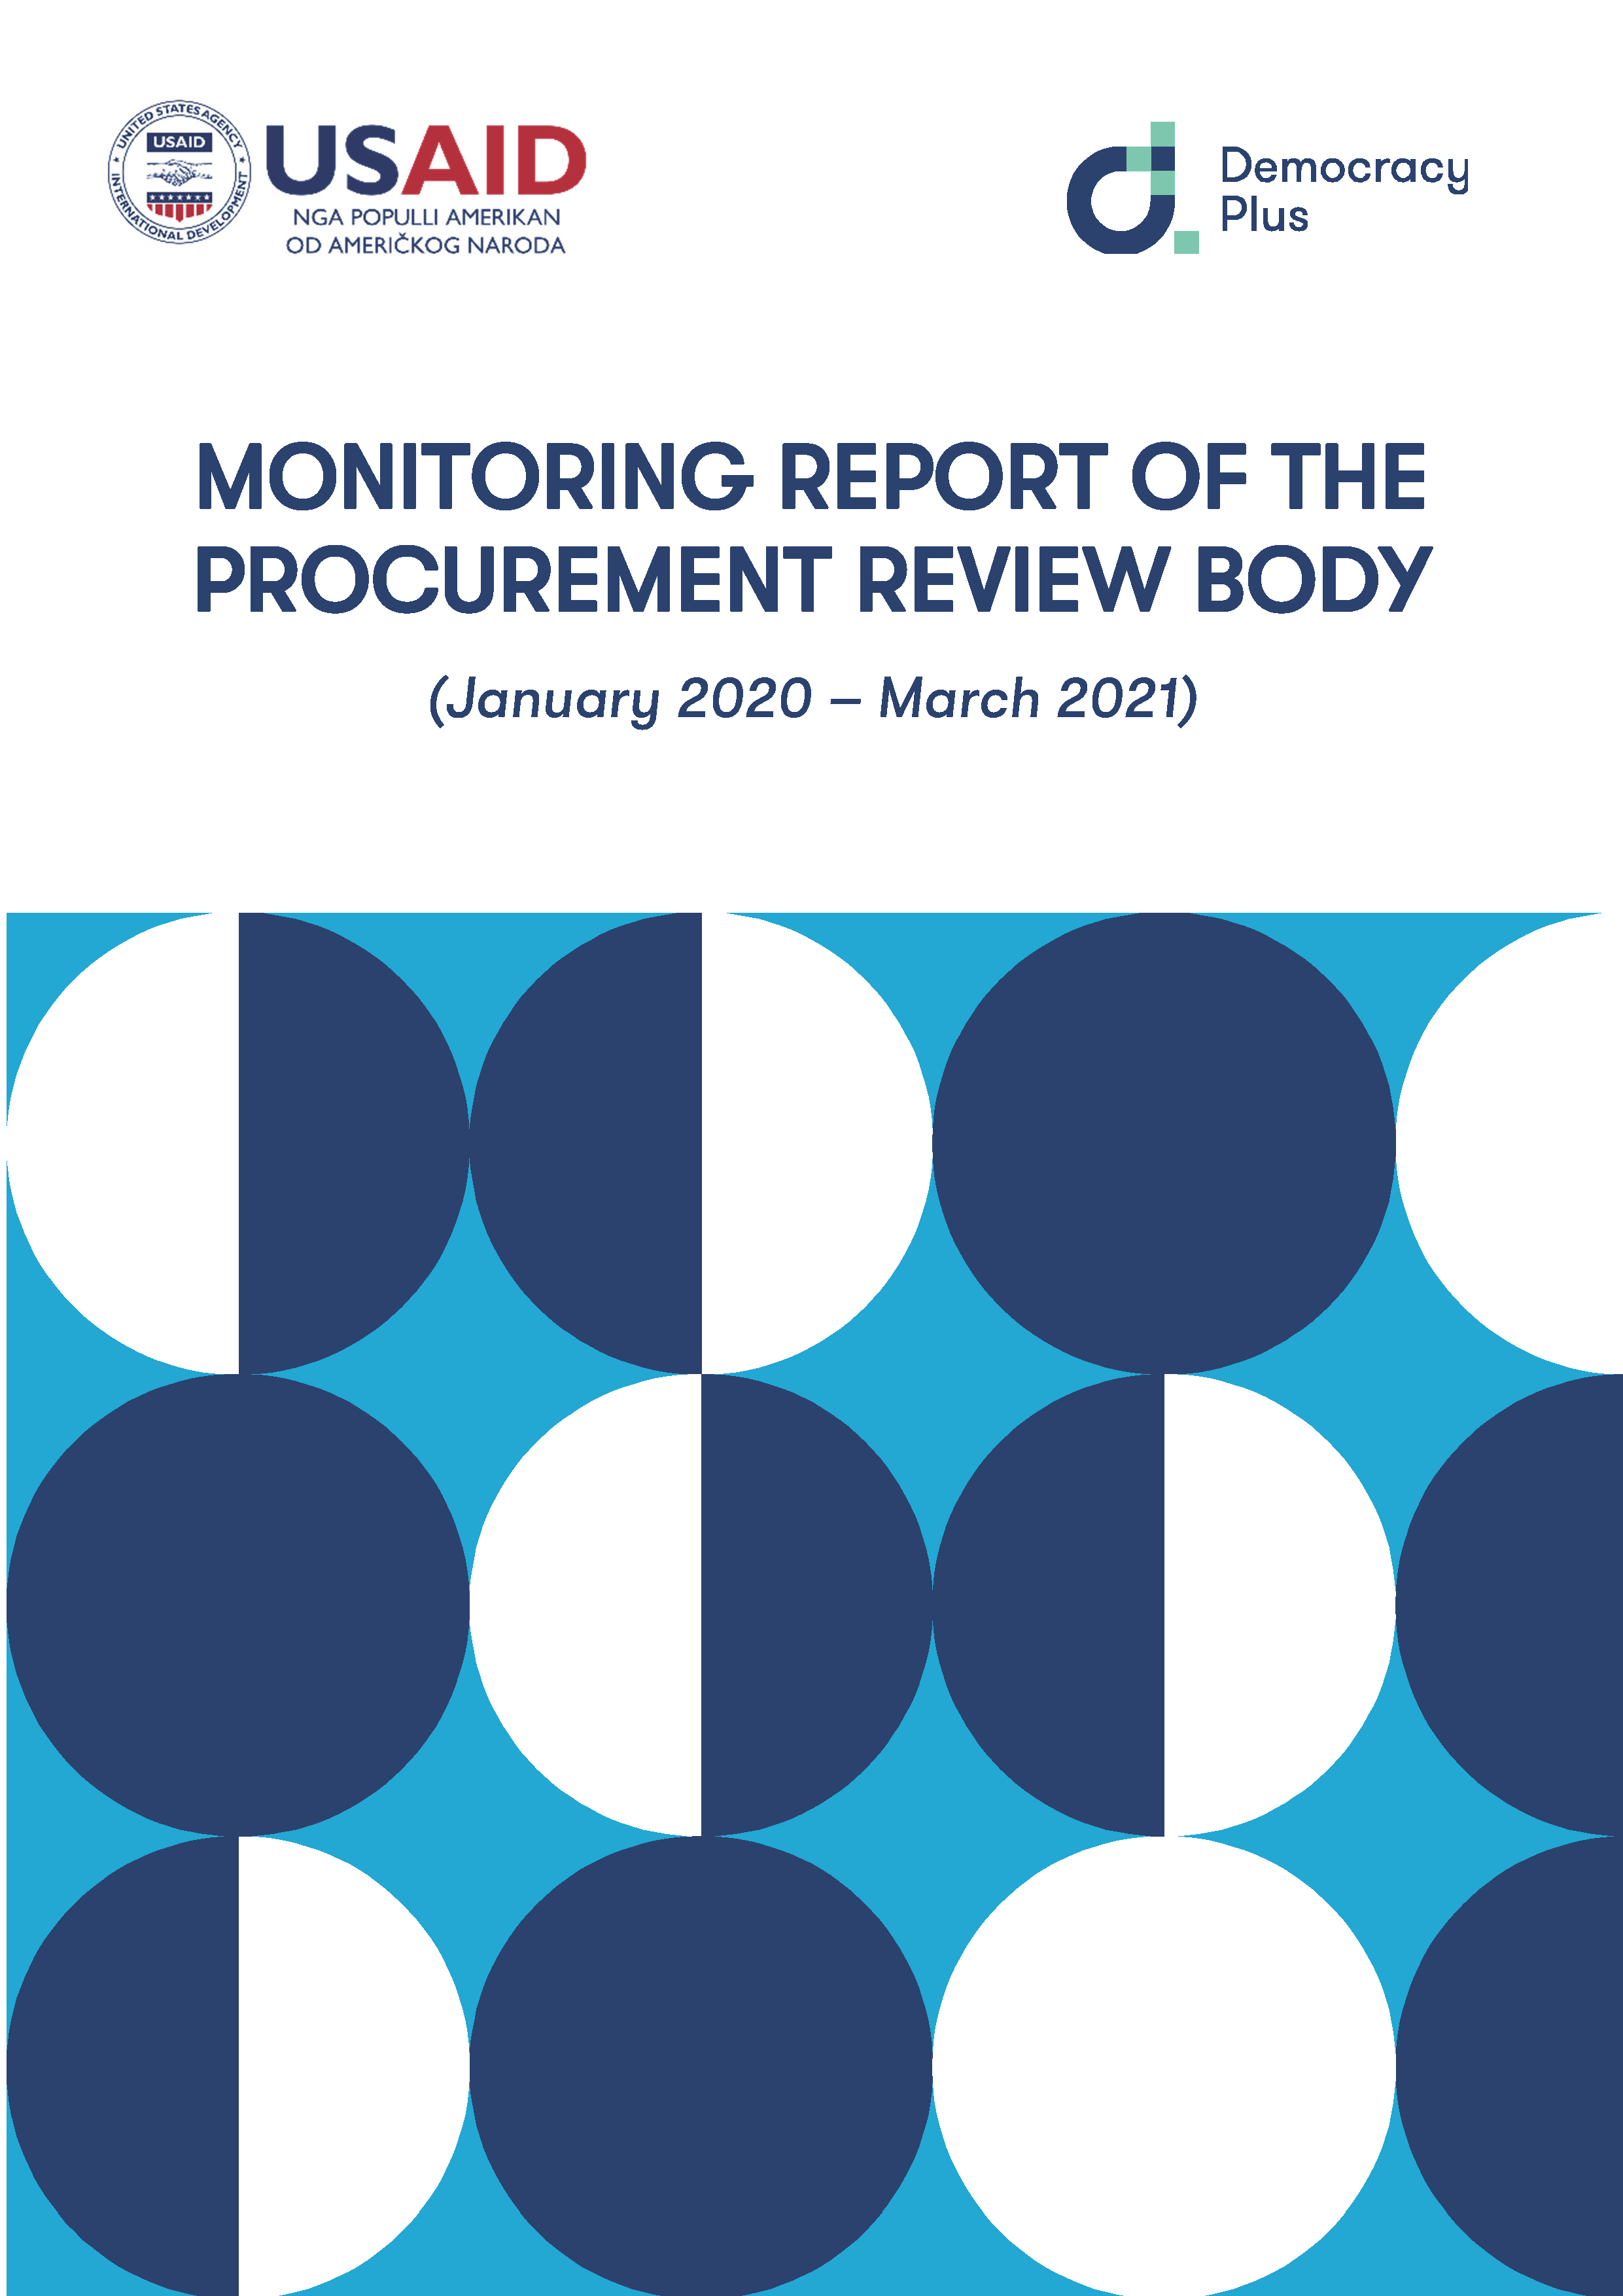 MONITORING REPORT OF THE PROCUREMENT REVIEW BODY (January 2020 – March 2021)